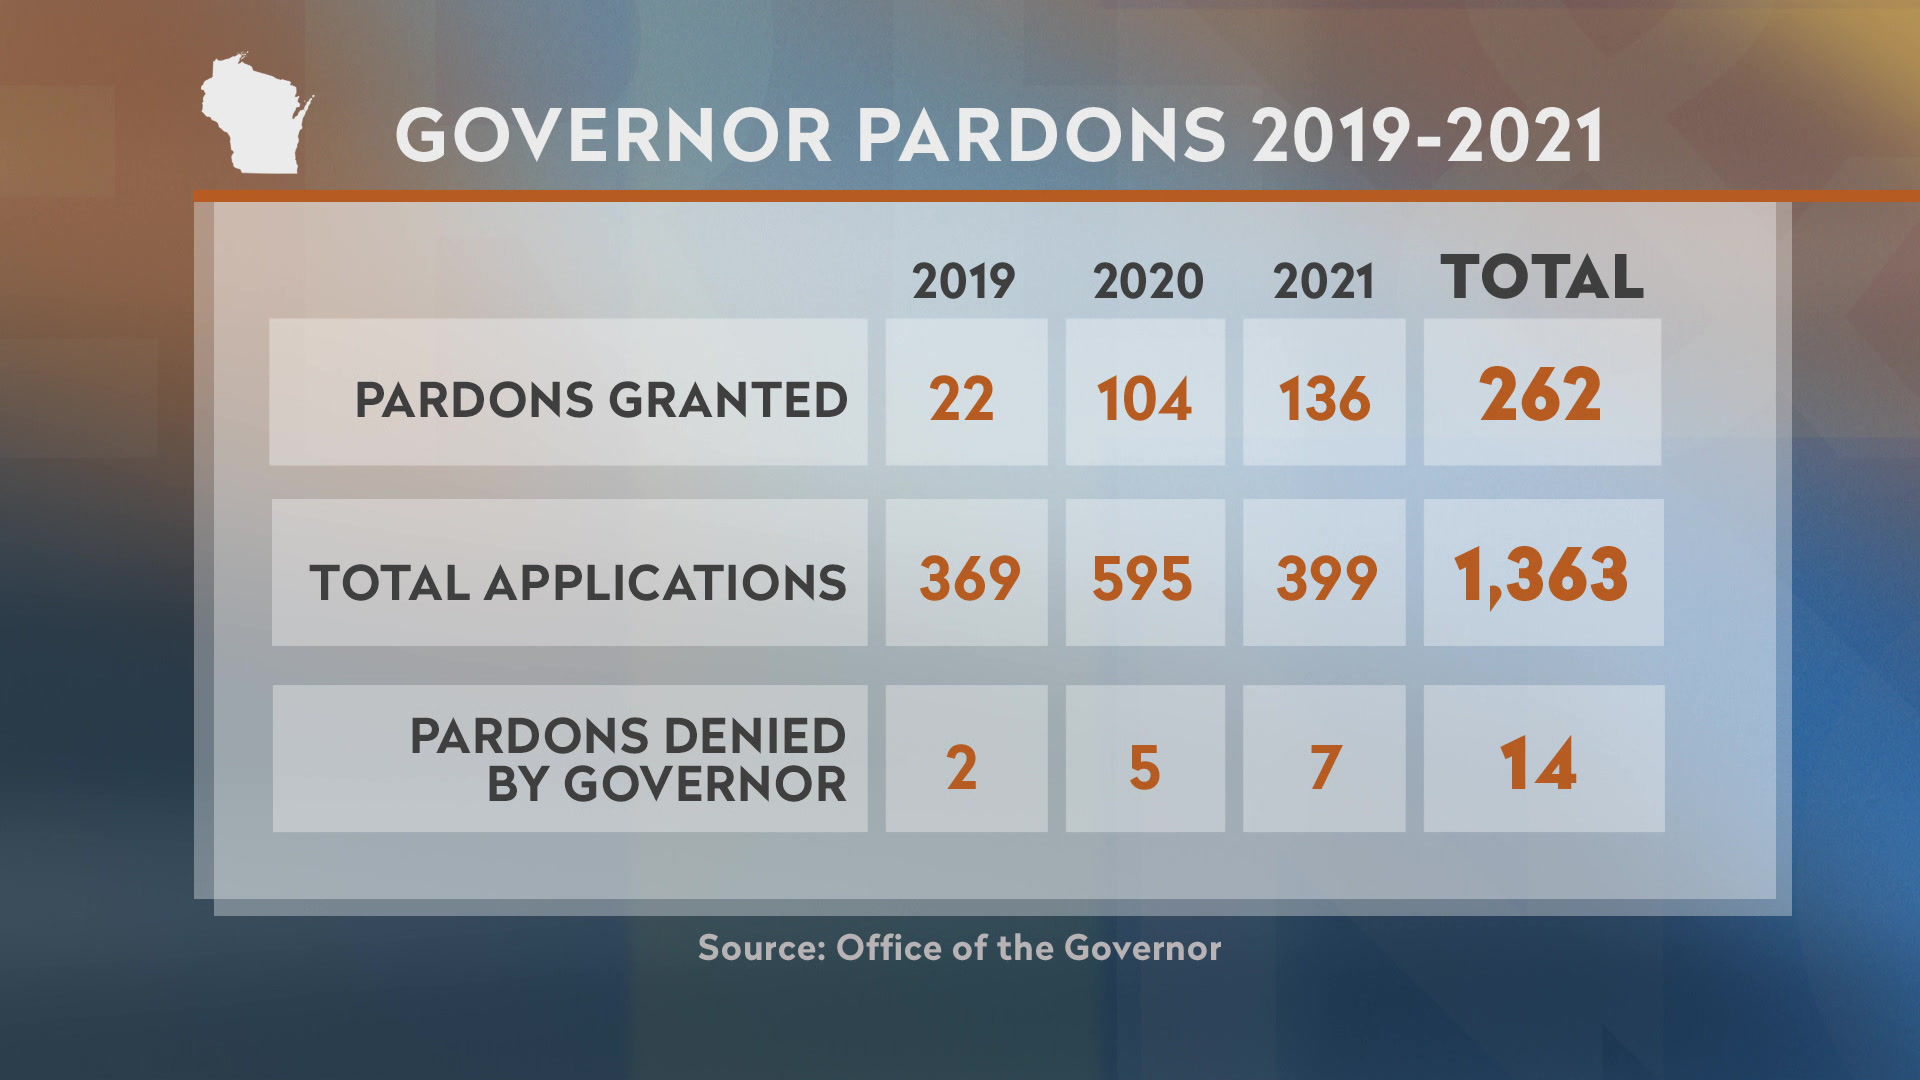 A table showing the number of pardon applications, grants and denials by the governor in 2019, 2020 and 2021.